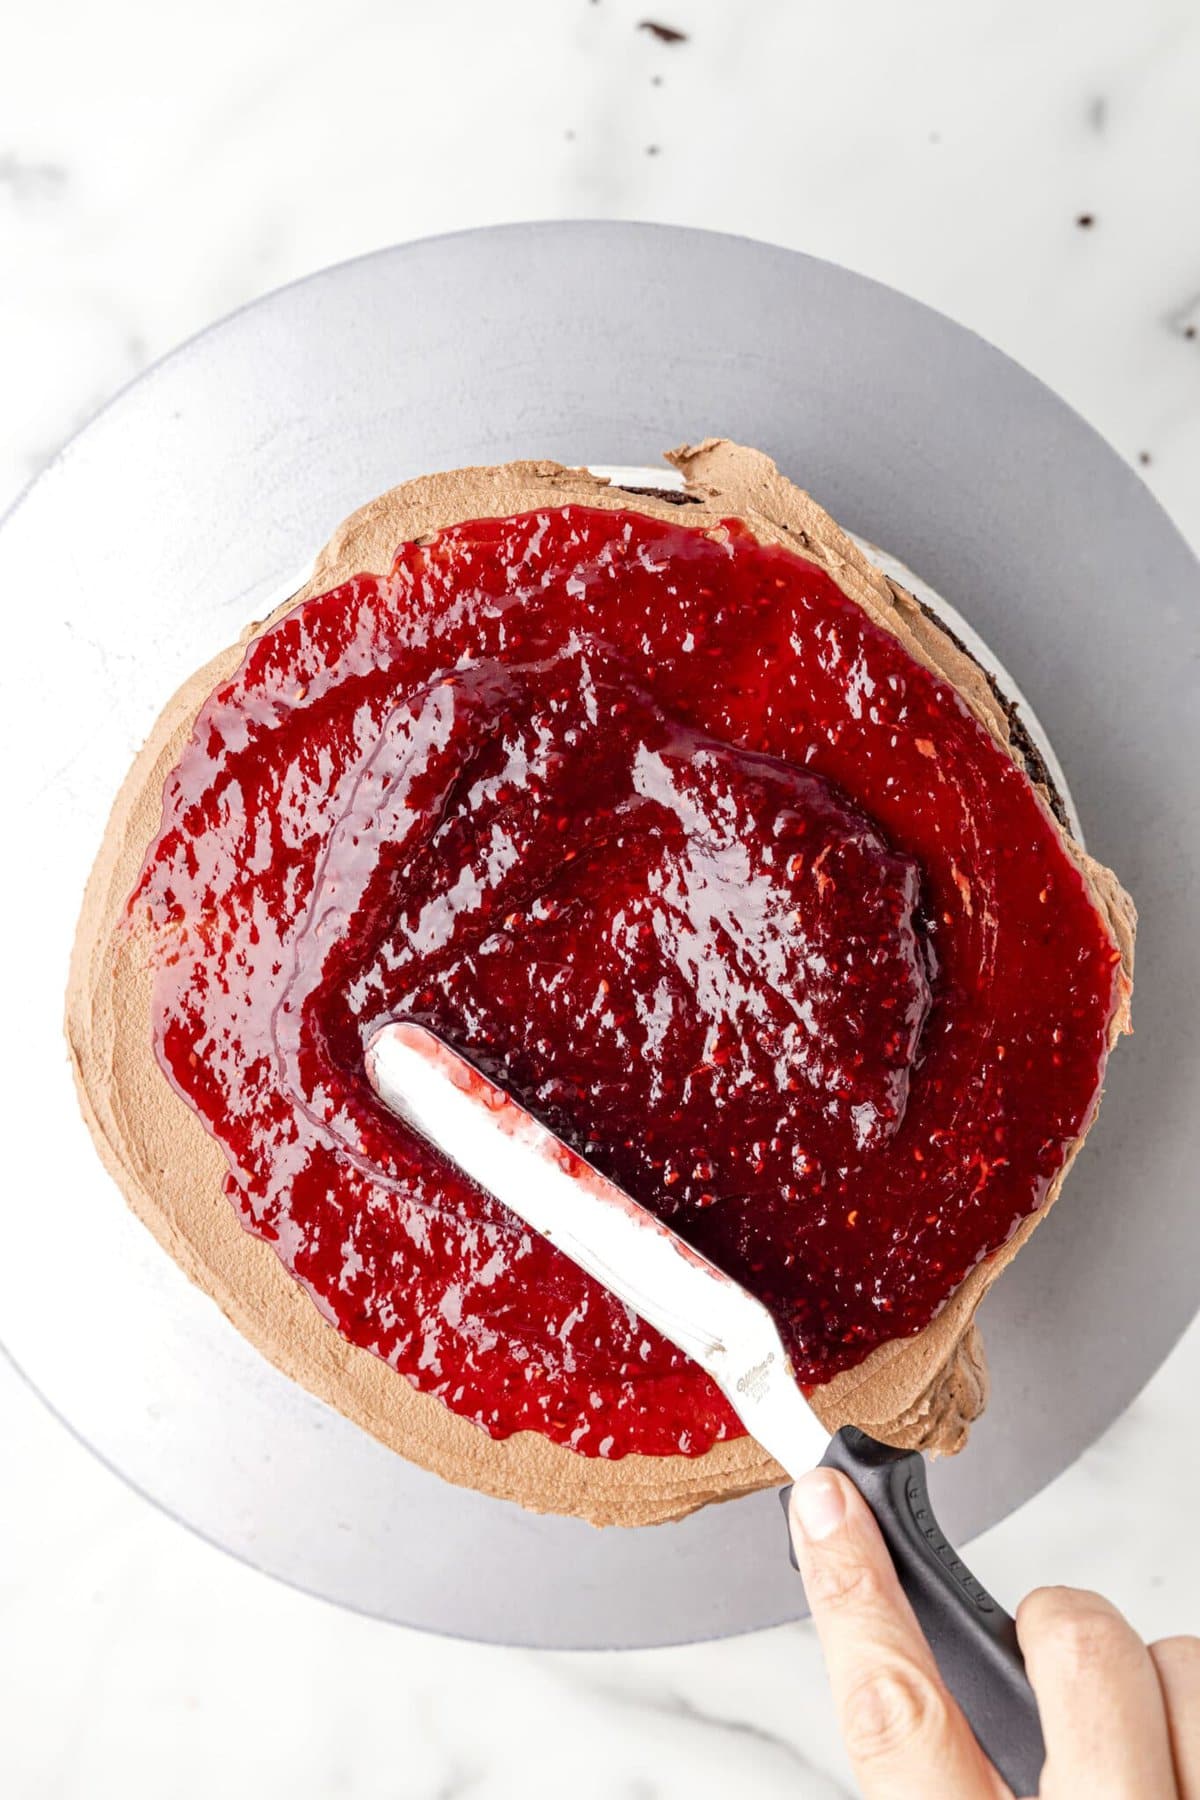 Adding a layer of the raspberry preserves over chocolate cake.